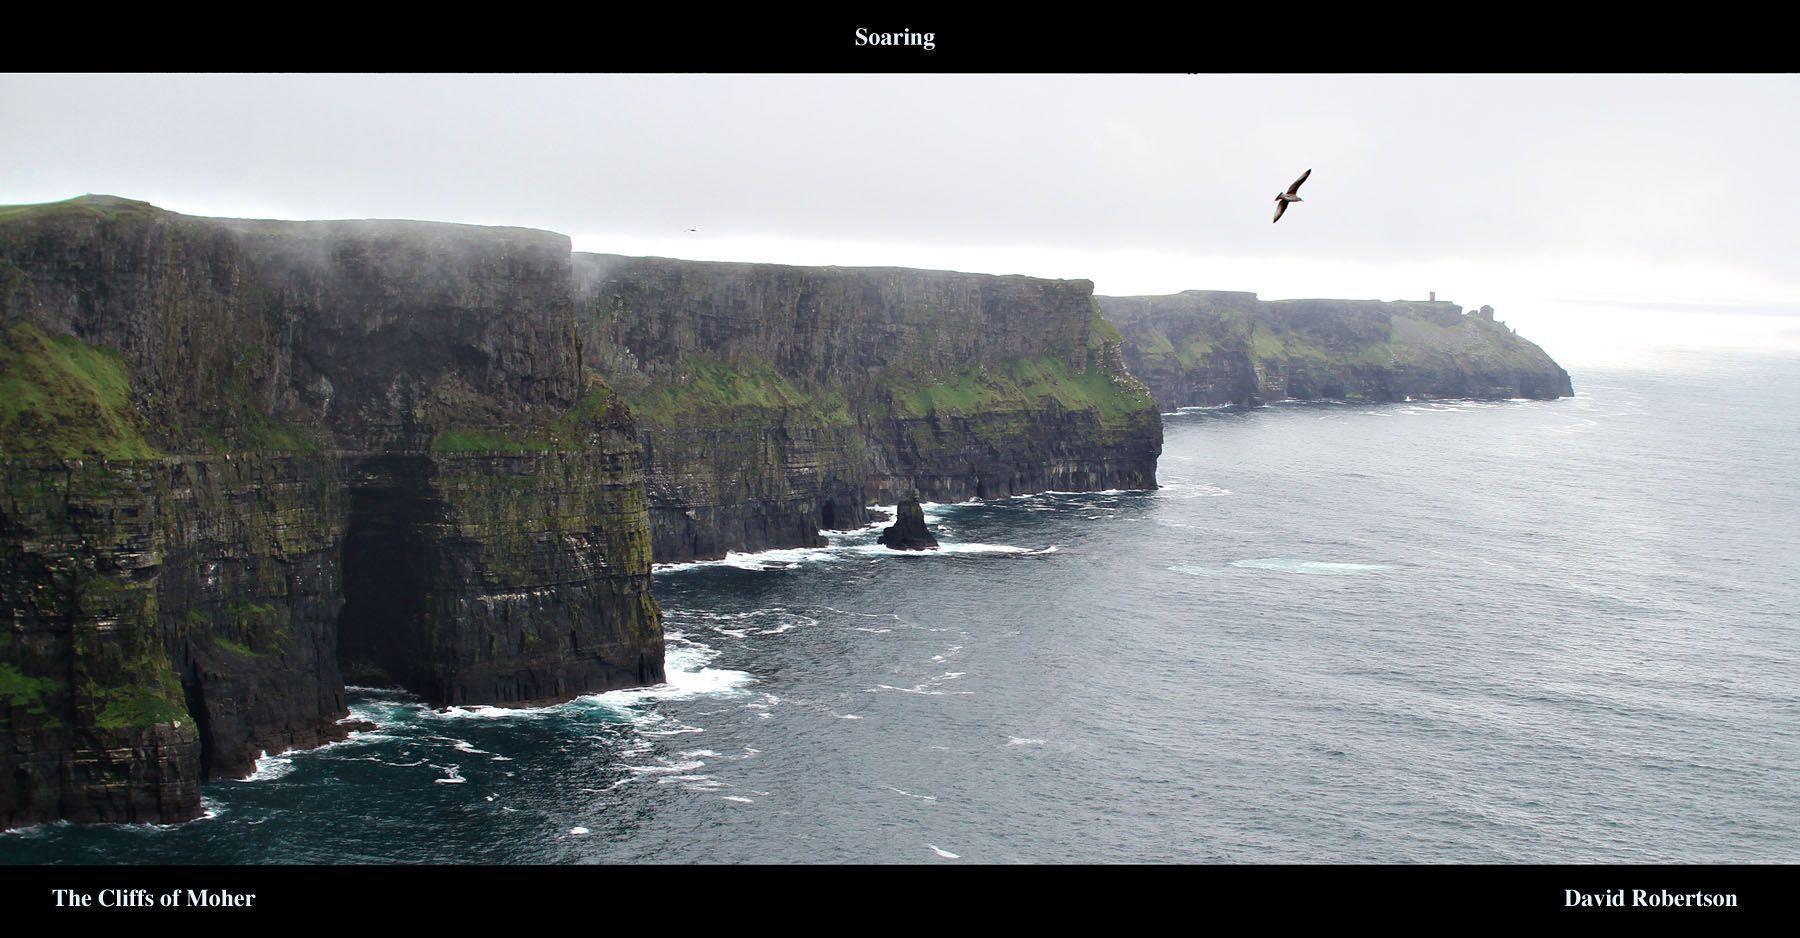 Soaring at the Cliffs of Moher